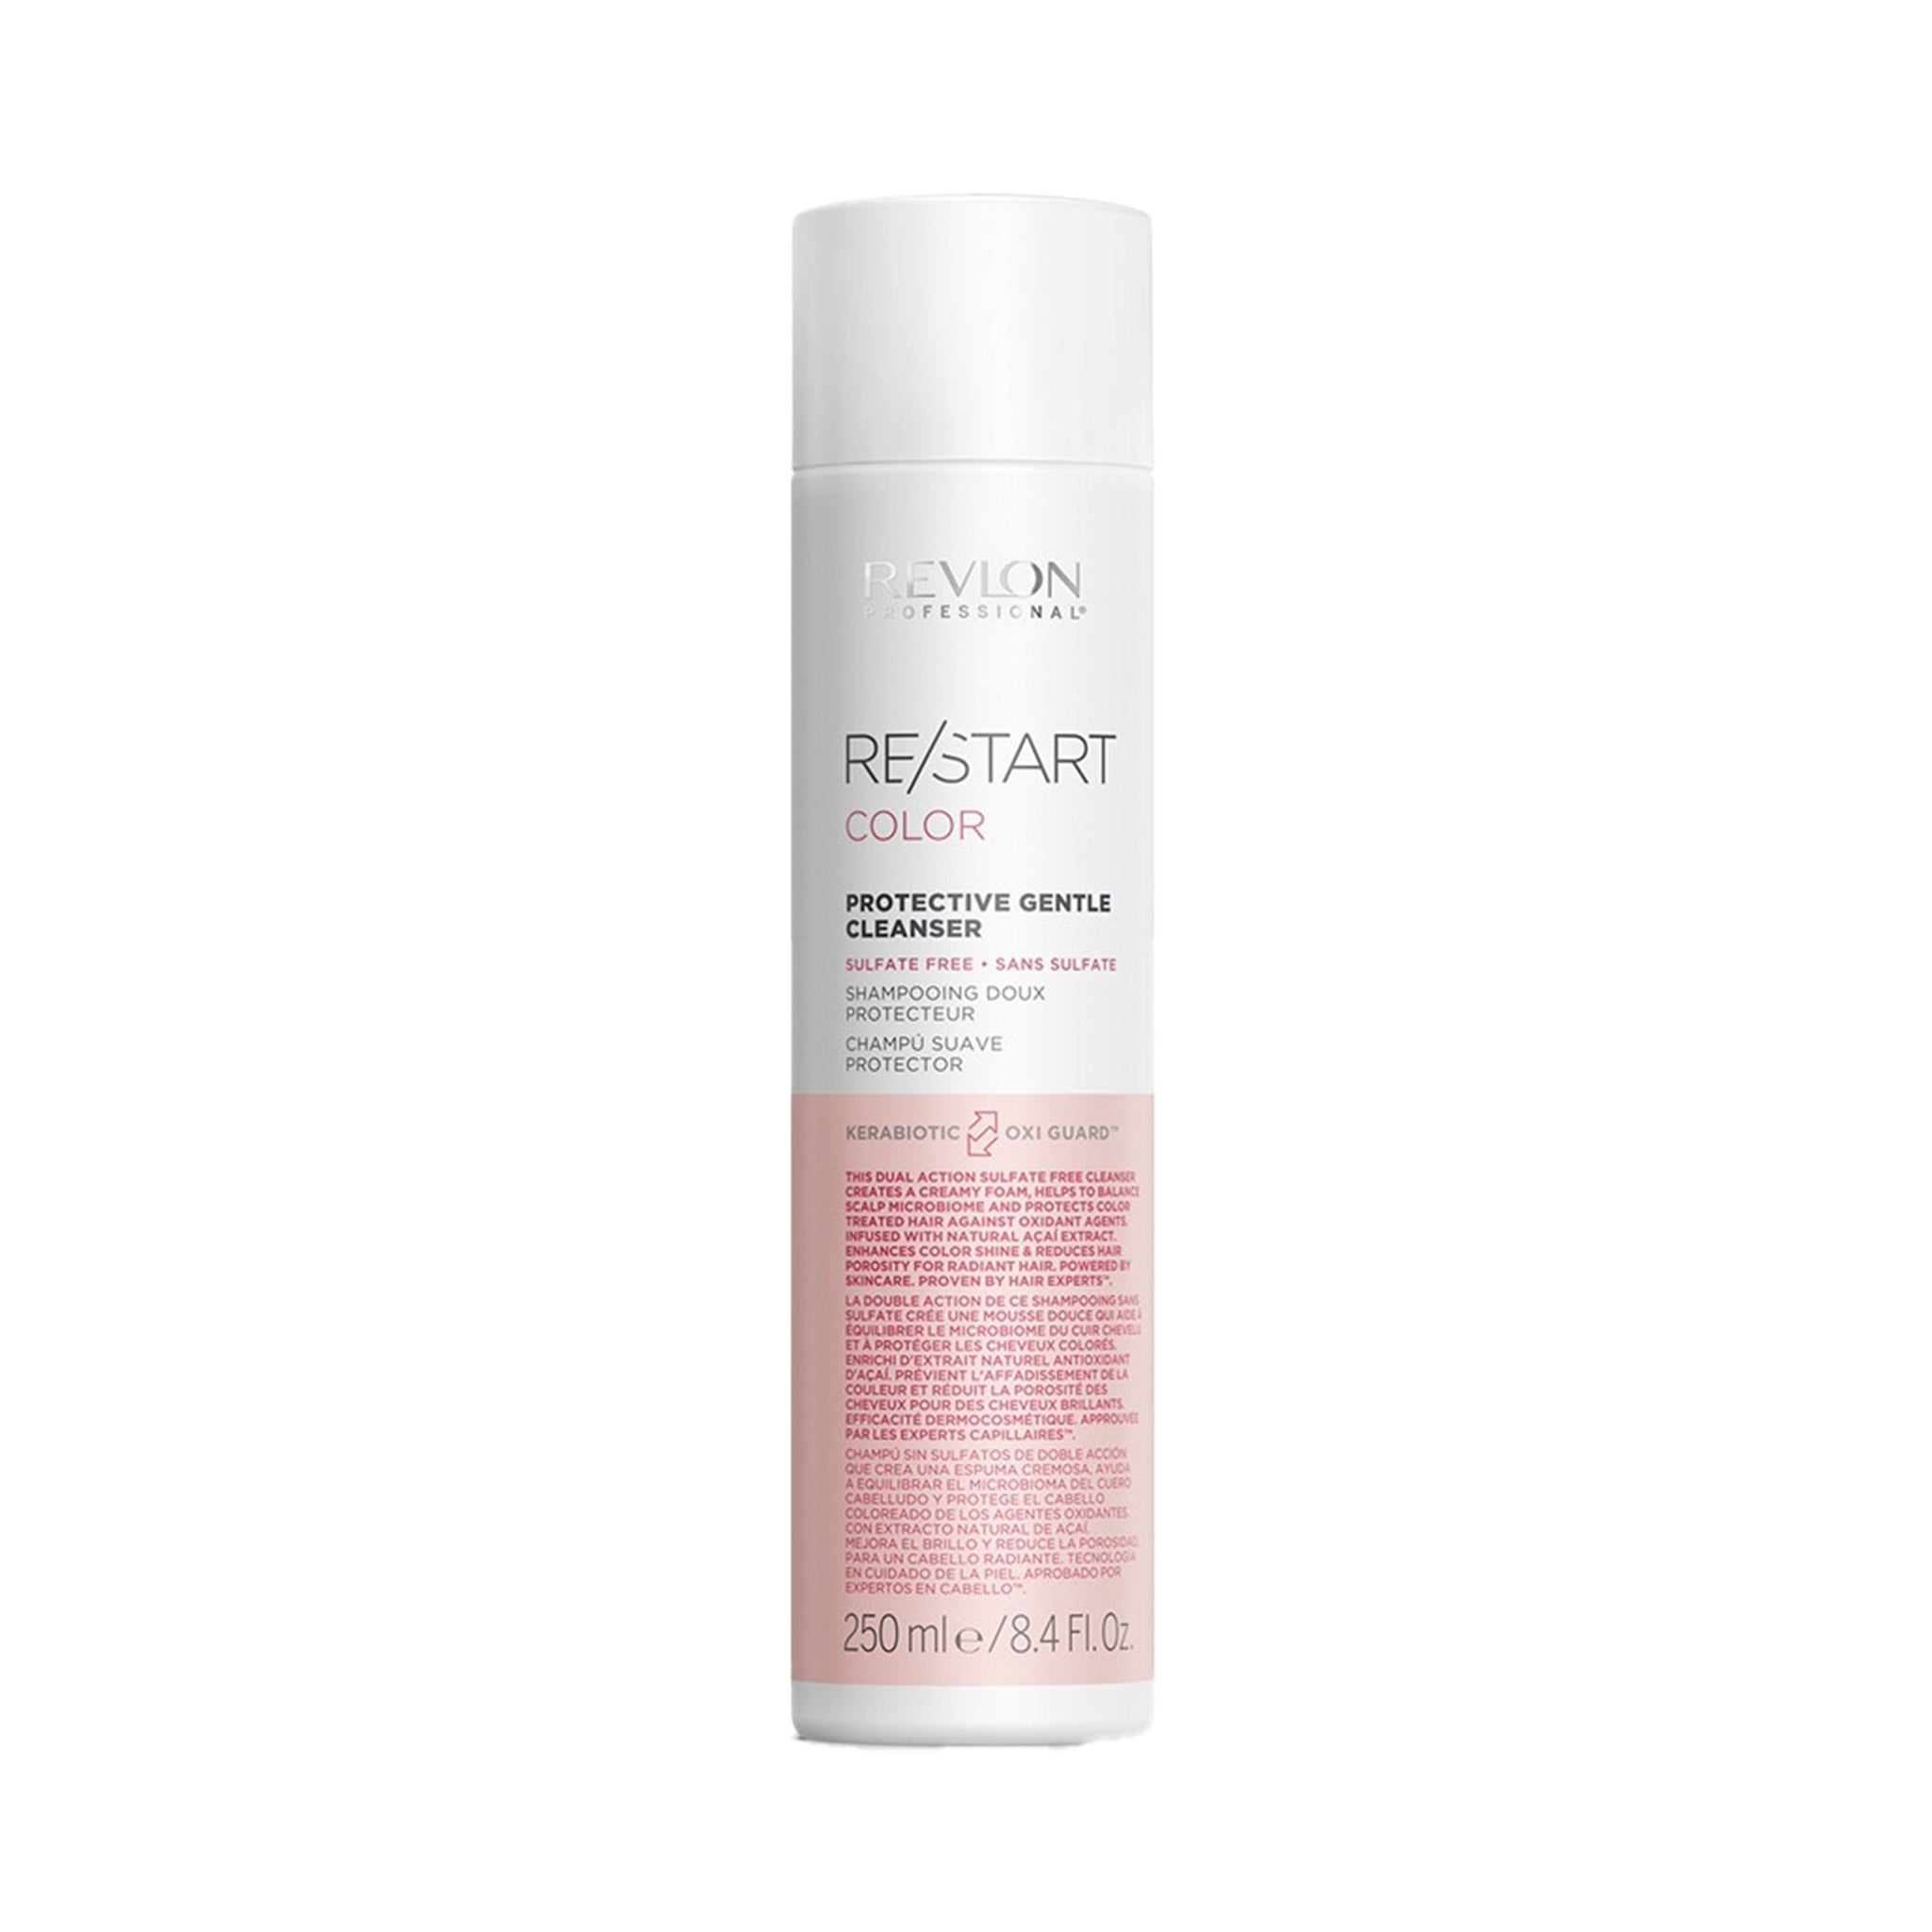 Re/start™ Color Protective Gentle Cleanser